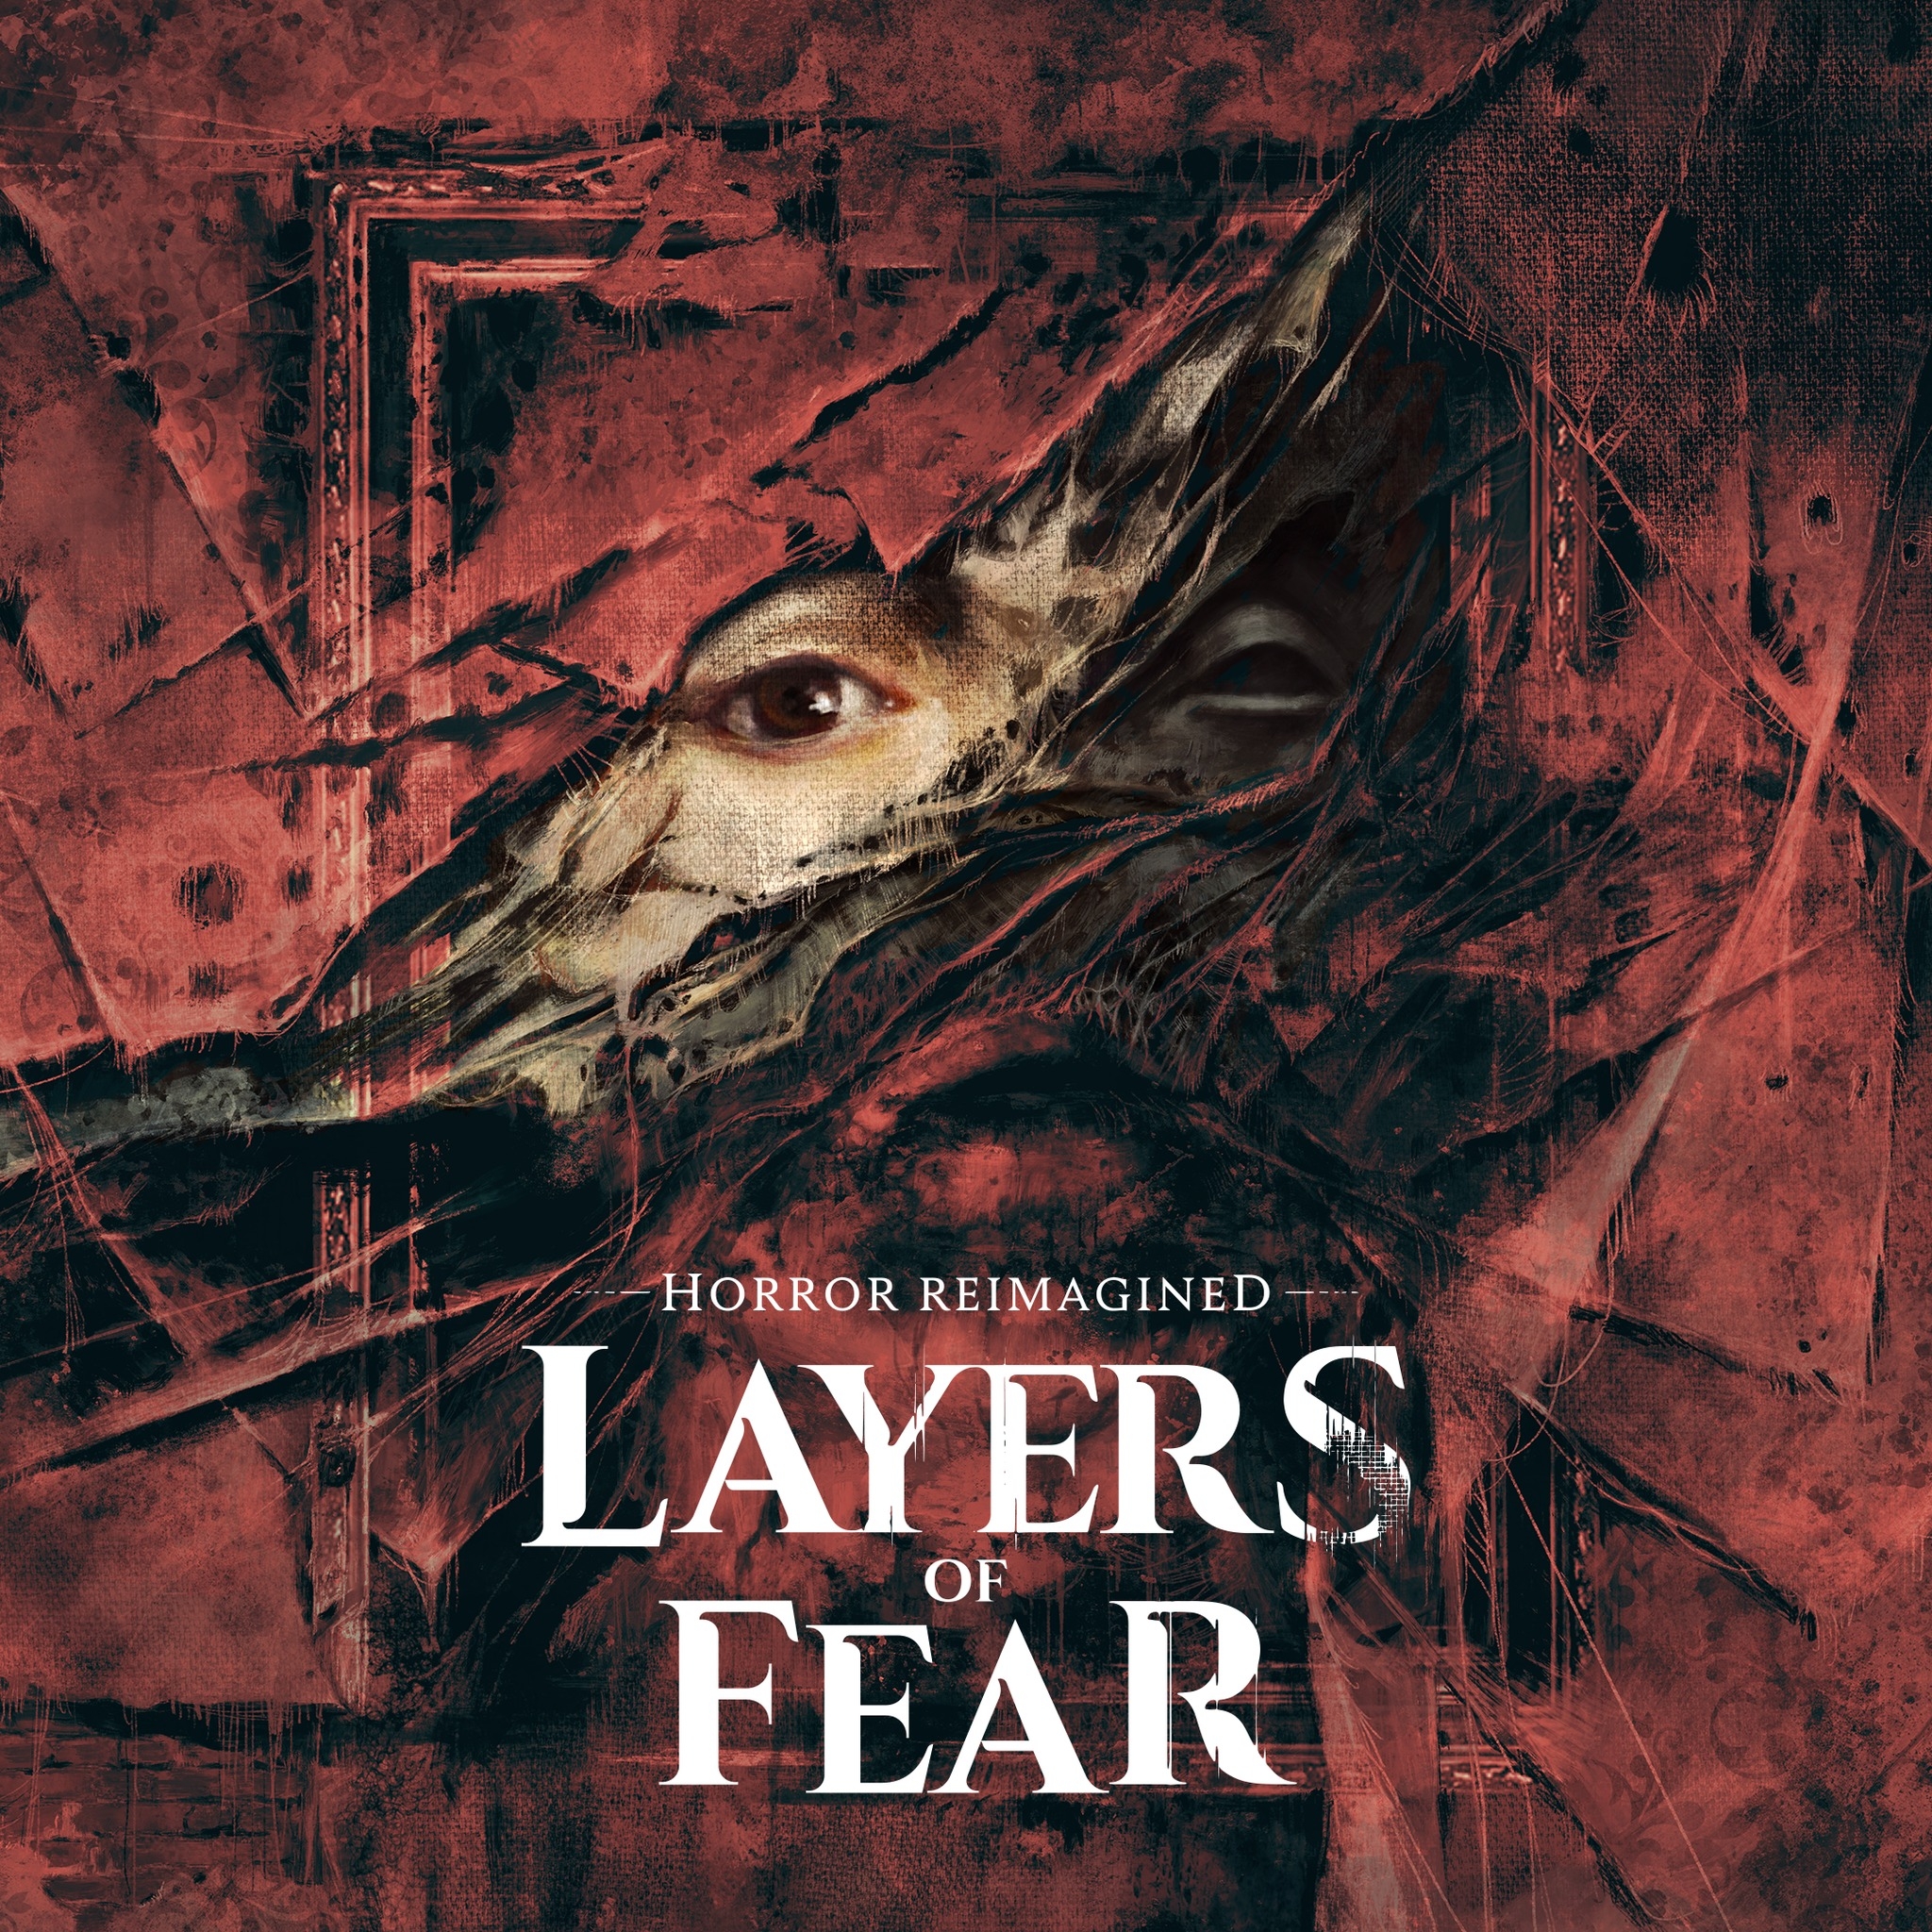 The Daughter, Layersoffear Wikia